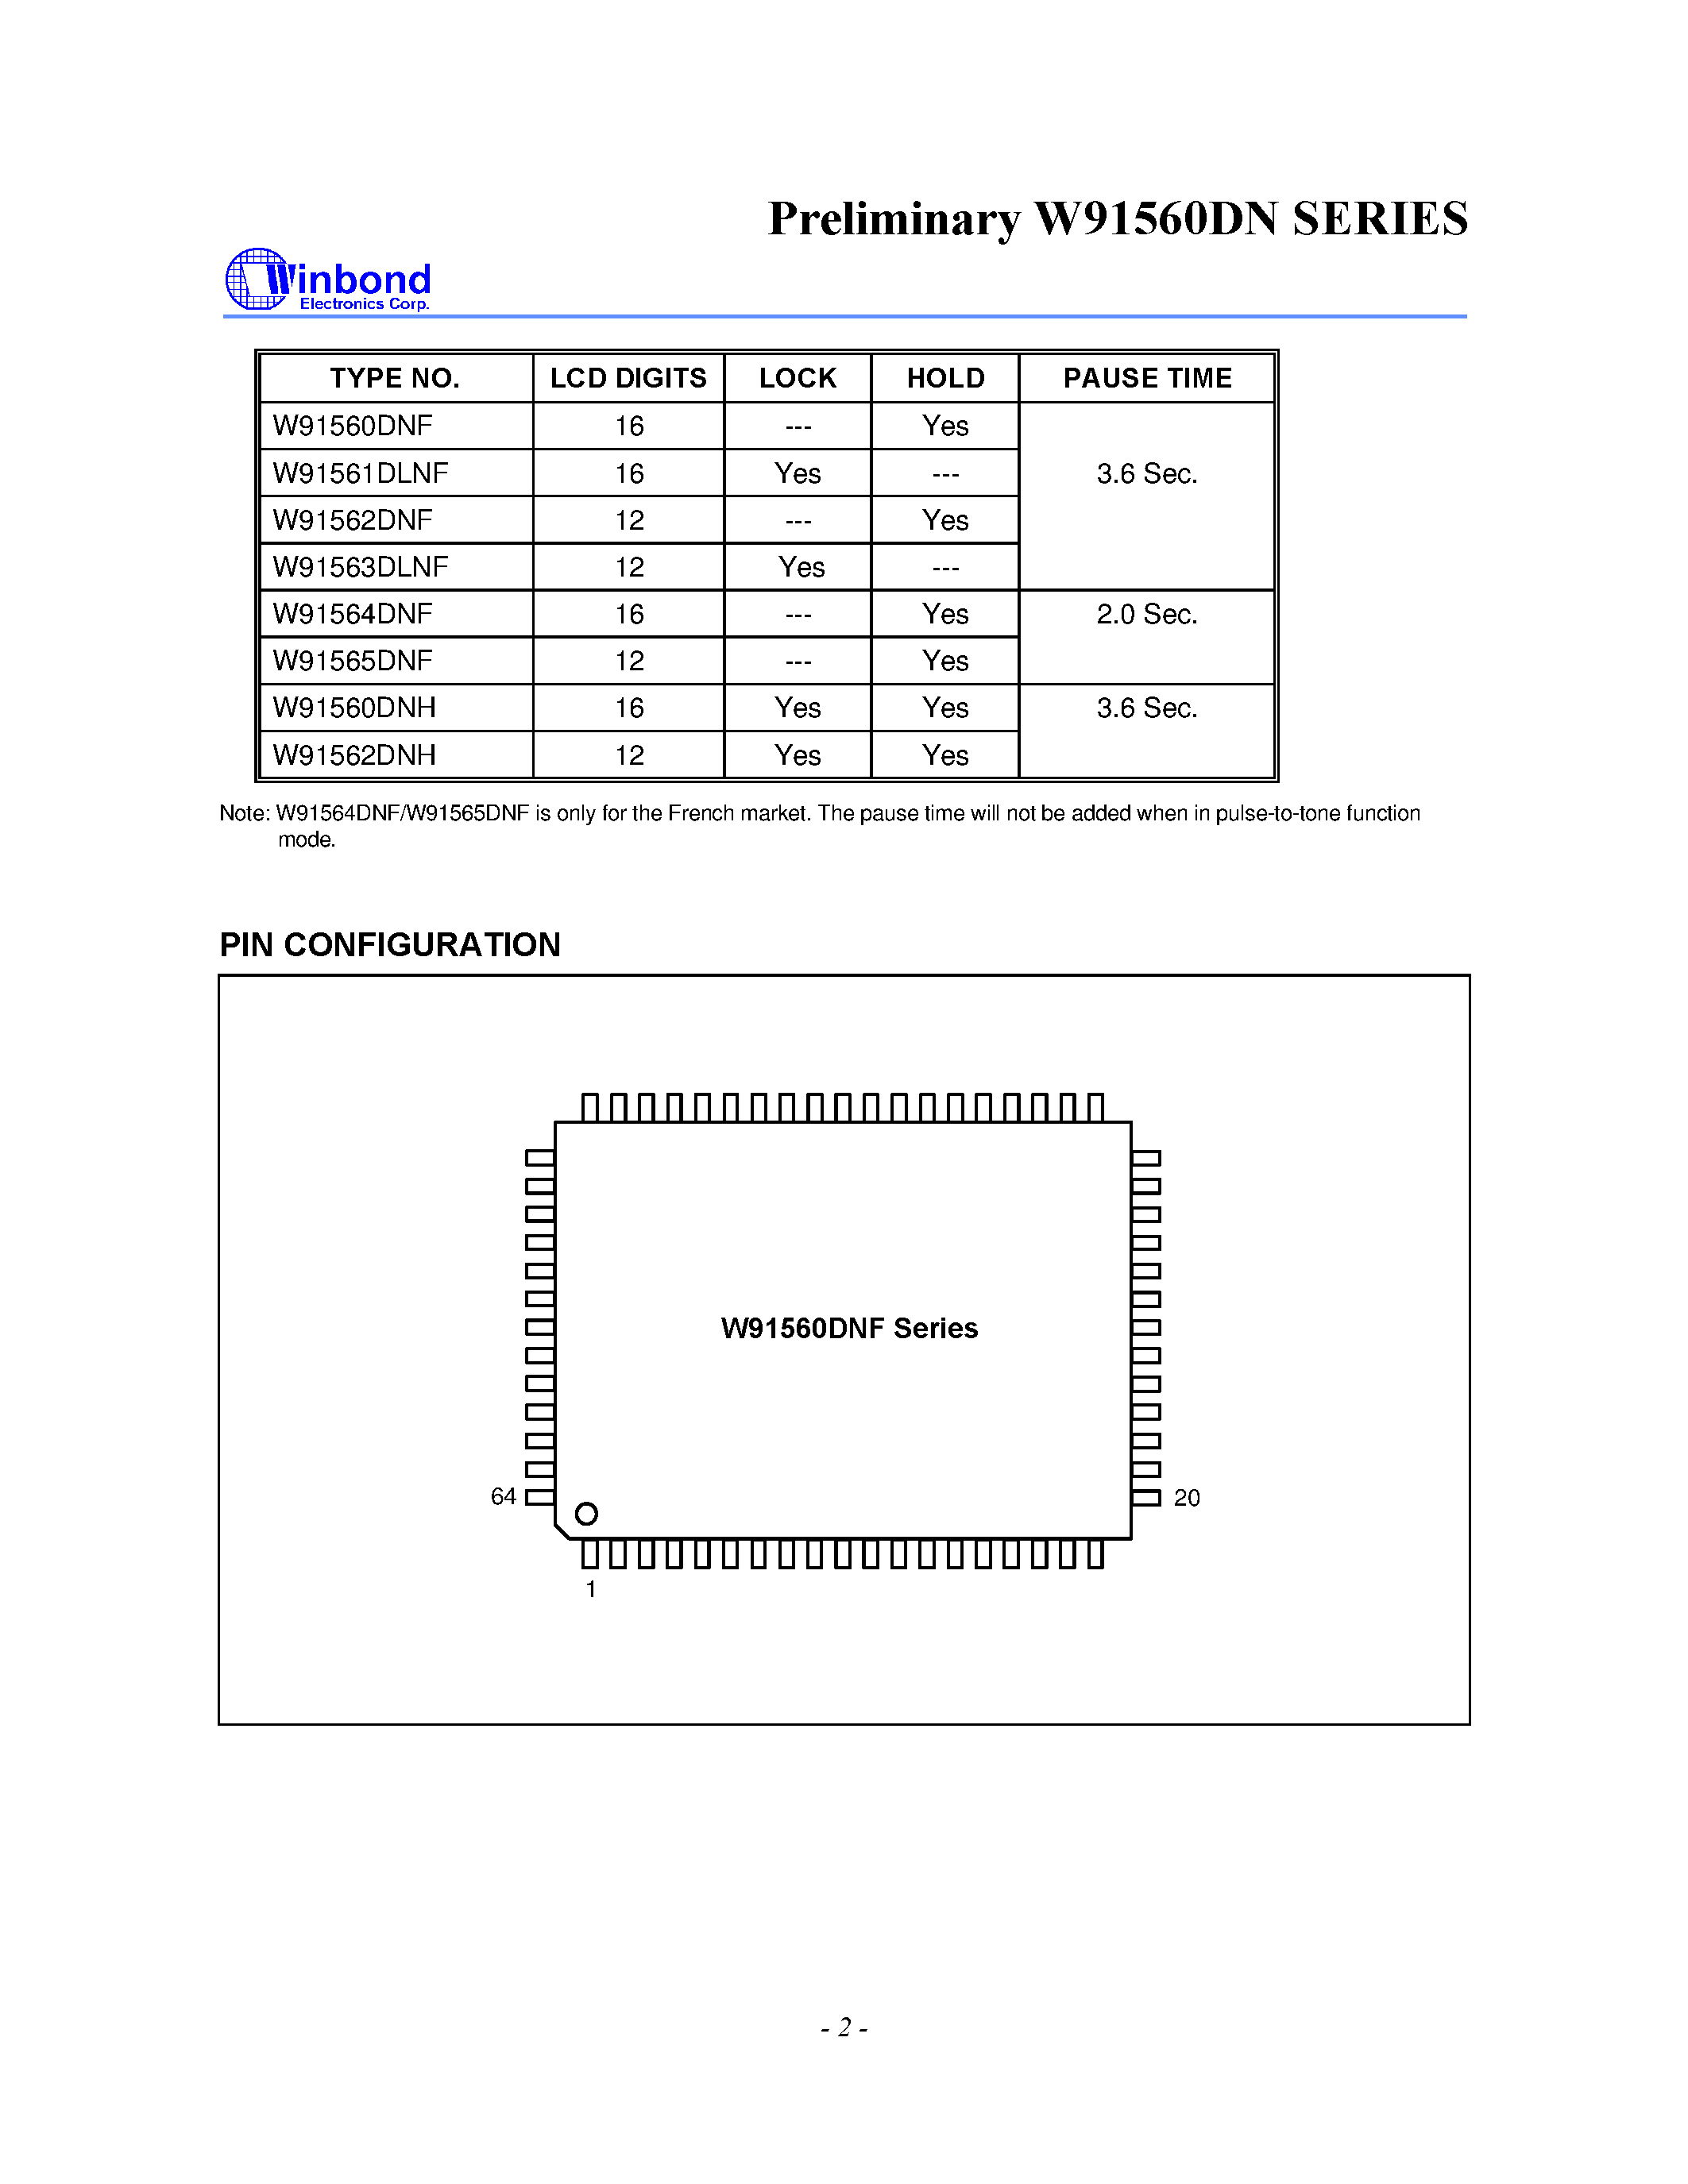 Datasheet W91561LN - 3-MEMORY TONE/PULSE DIALER WITH SAVE/ KEYTONE/ LOCK AND HANDFREE FUNCTIONS page 2